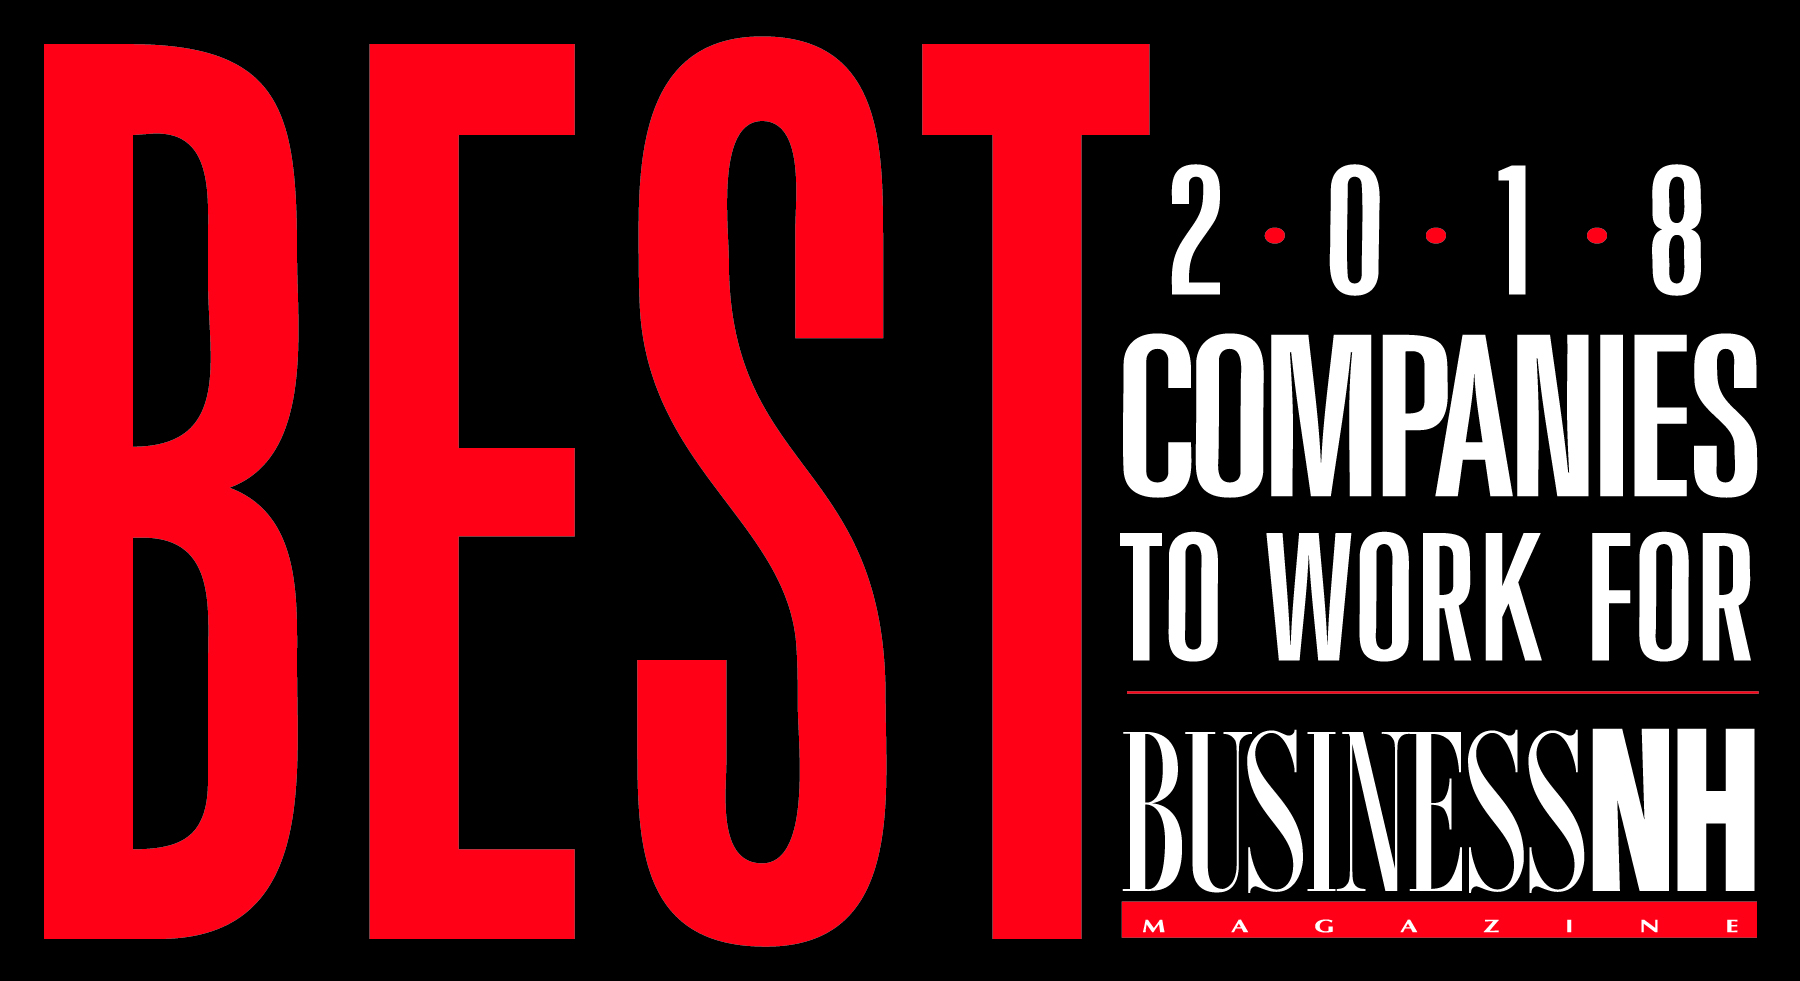 Mainstay Recognized as a “2018 Best Companies to Work For” by BusinessNH Magazine